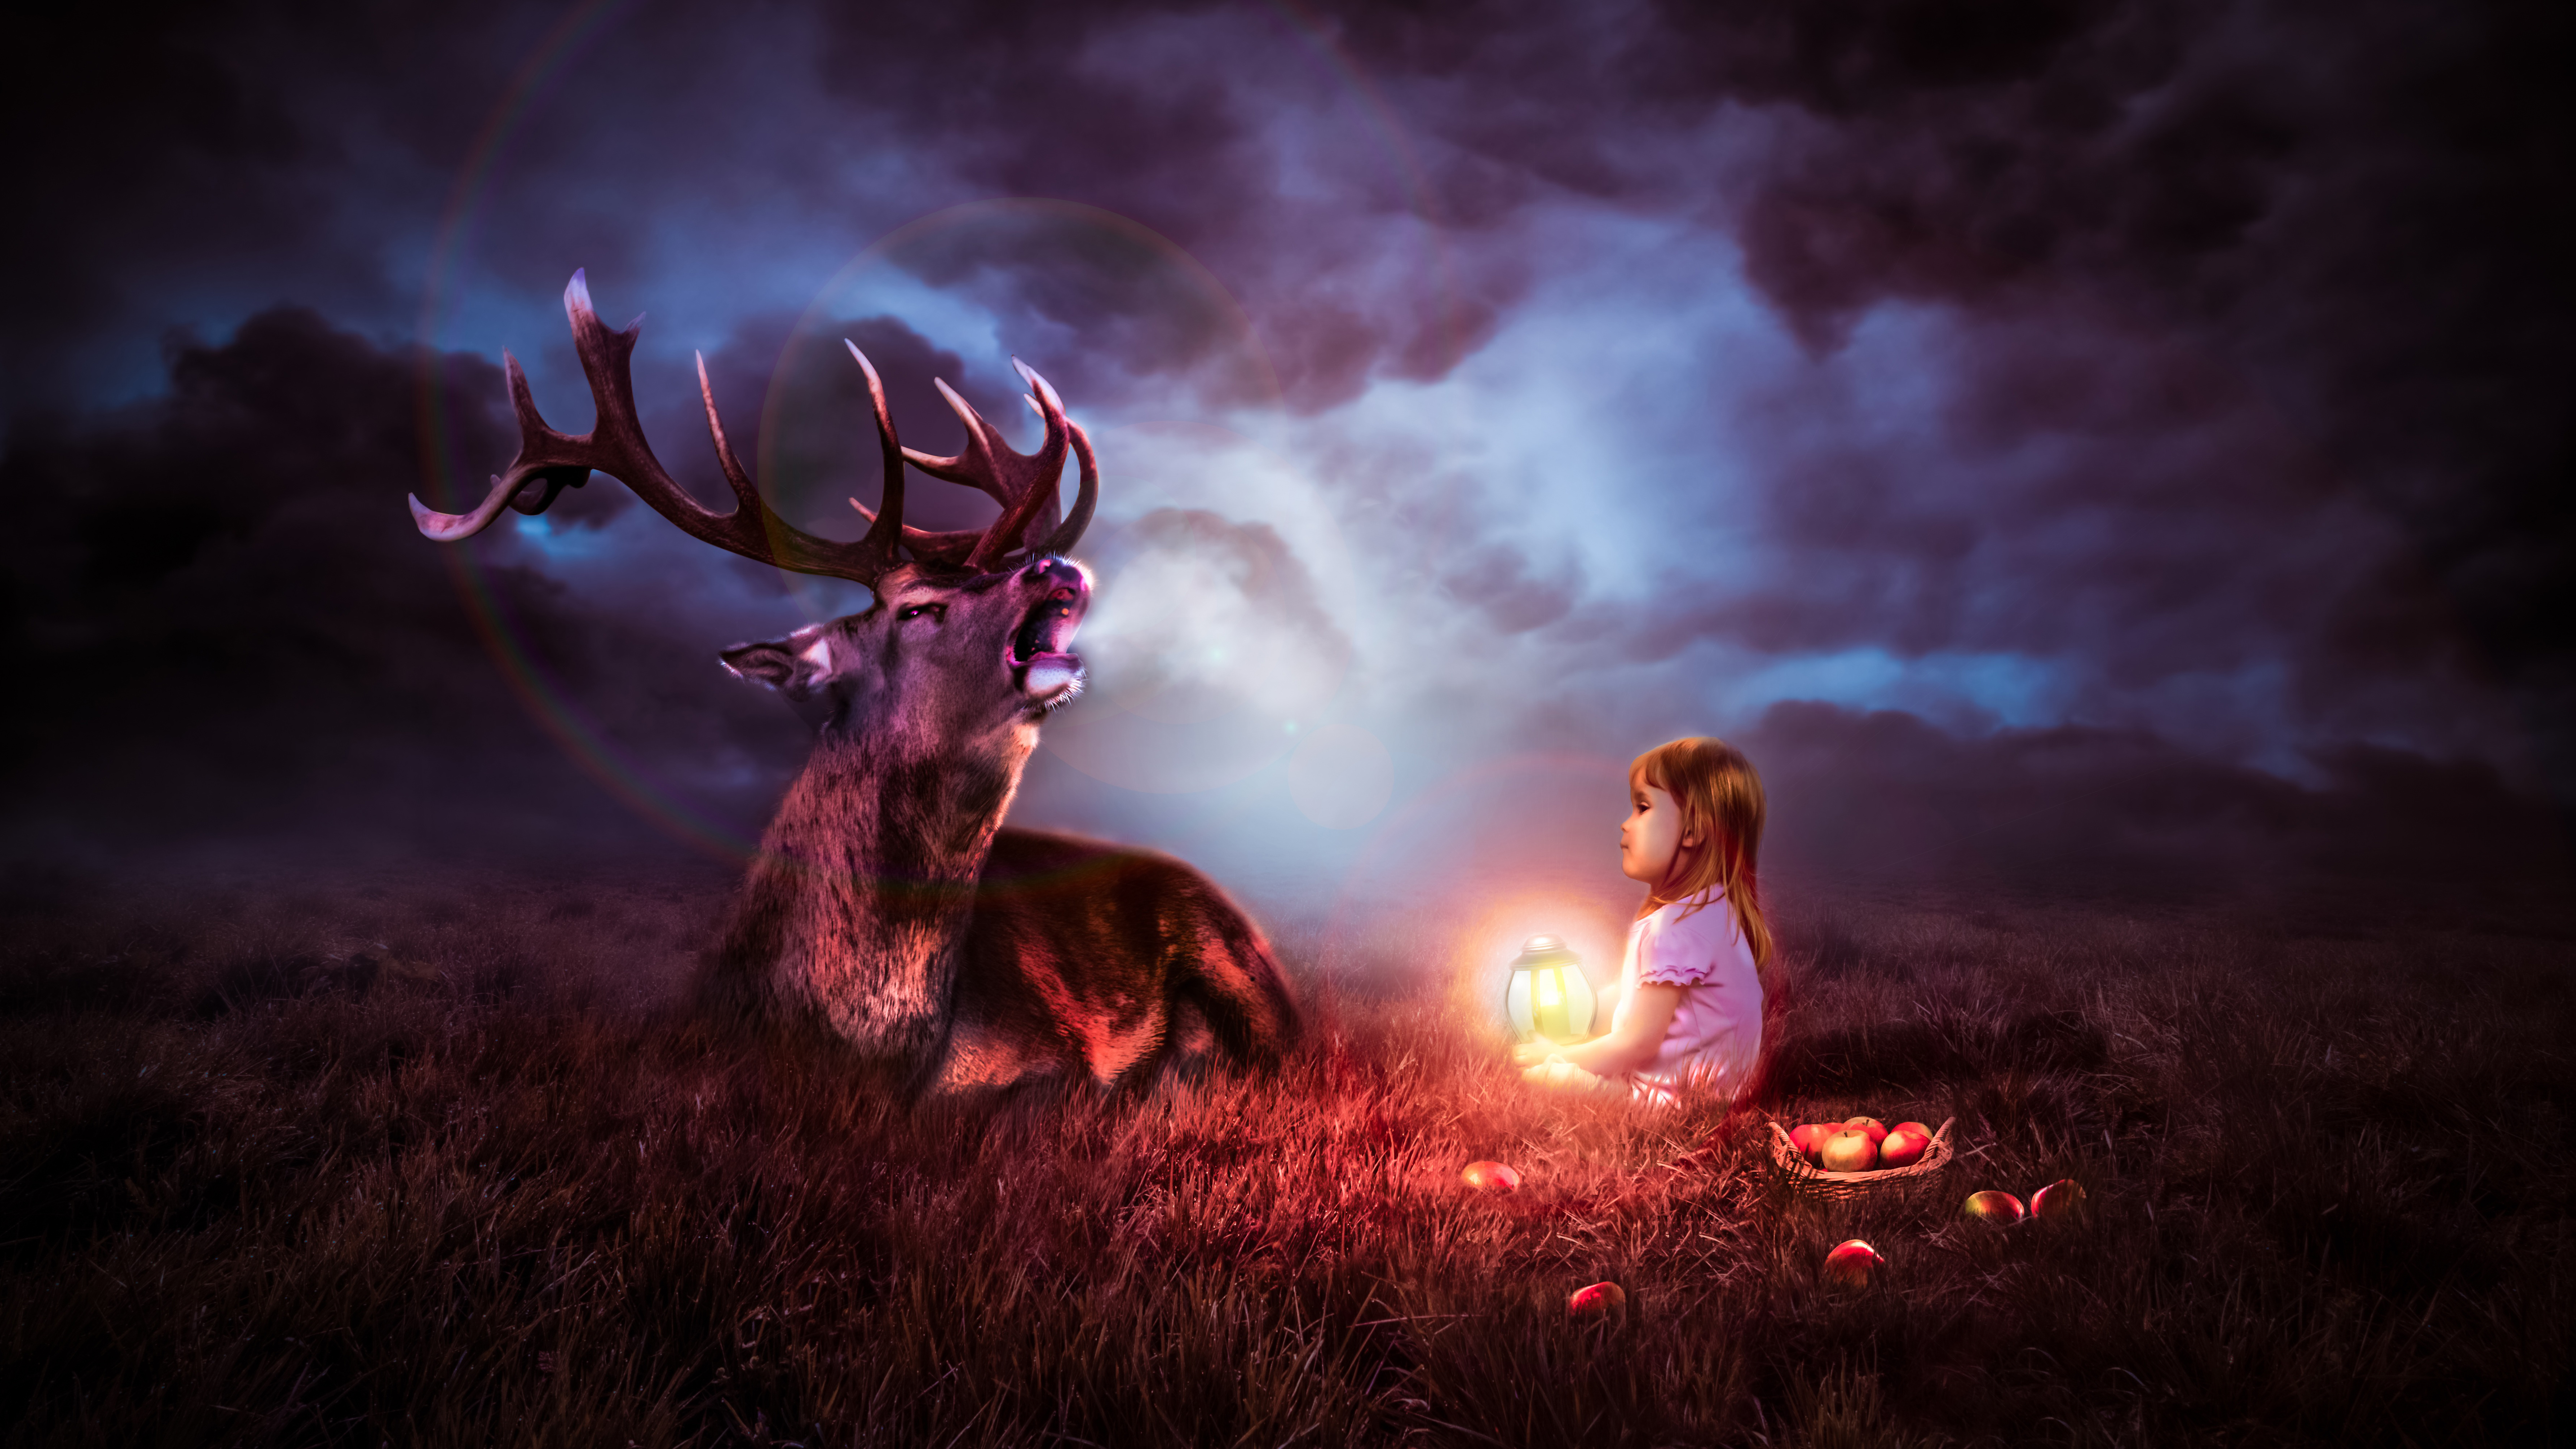 Lantern Child with A Deer In The Night 4K 8K